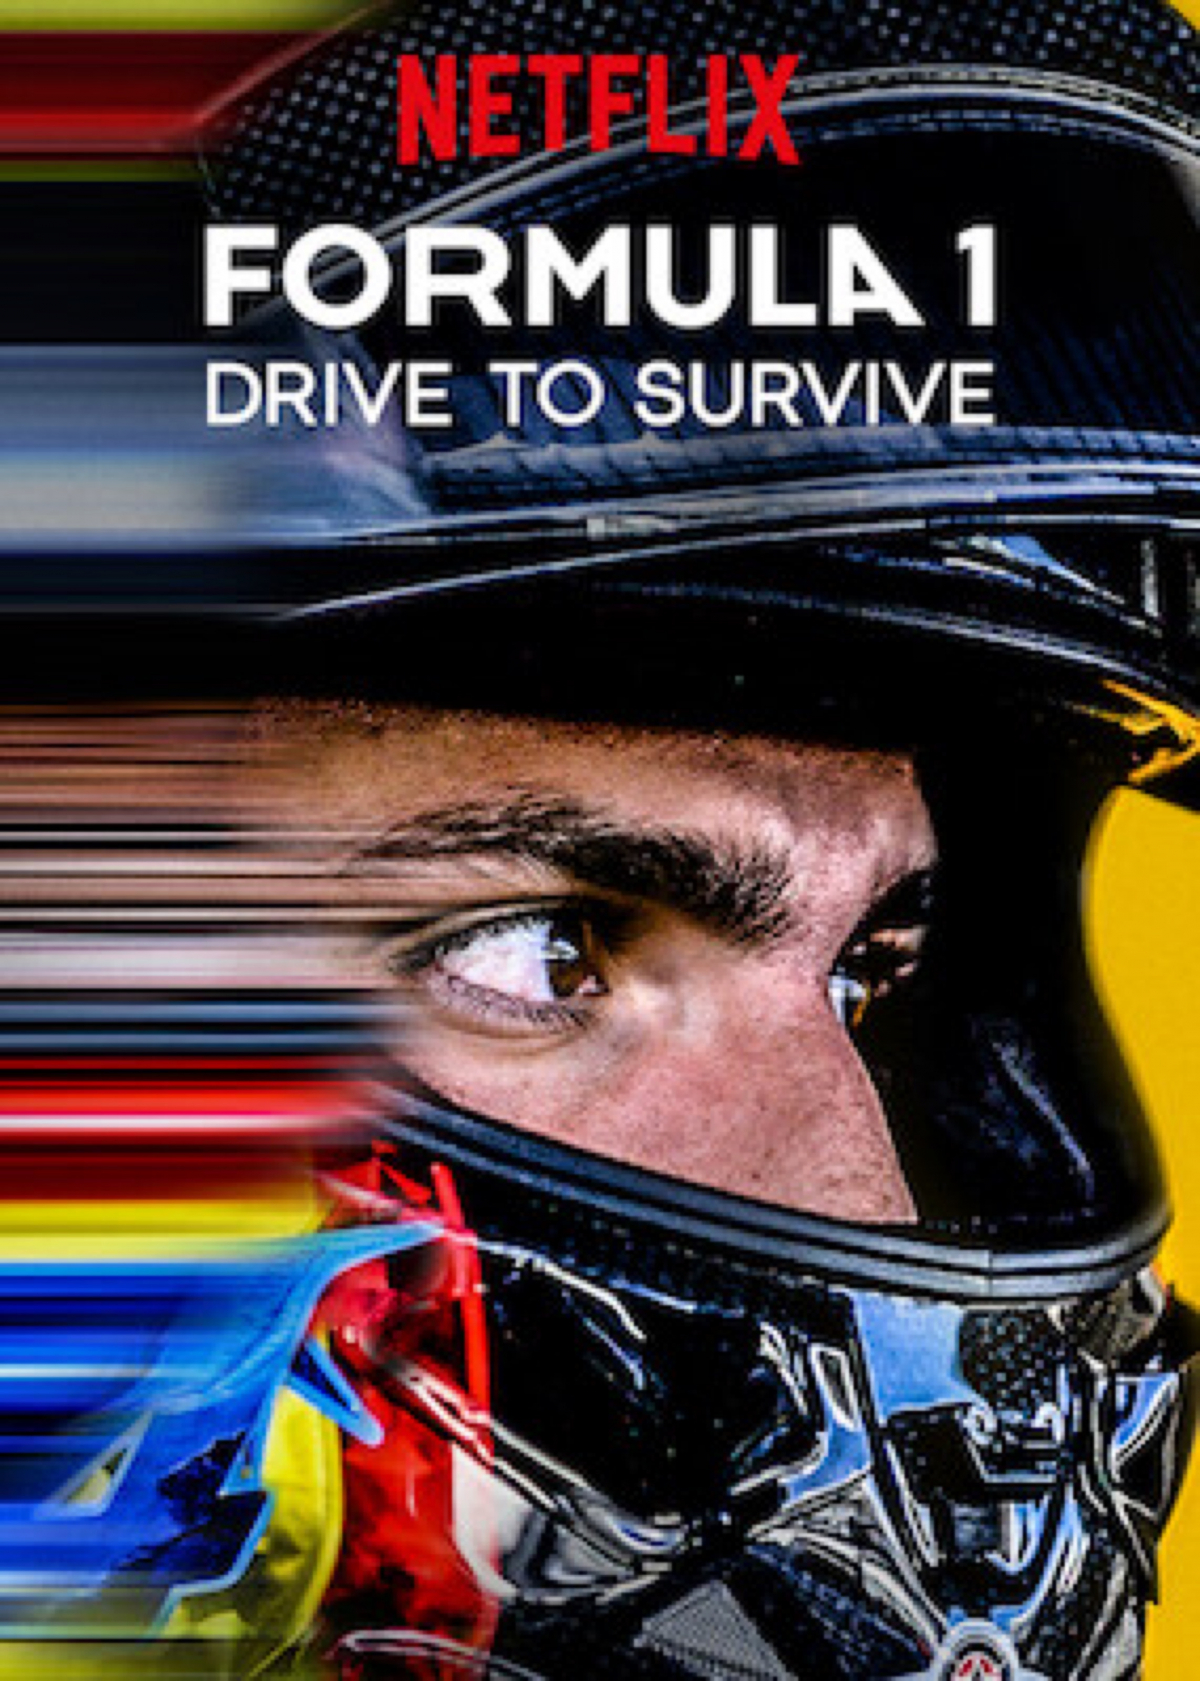 Formula 1: Drive to Survive Season 1 Episode 5 “Trouble at the Top”